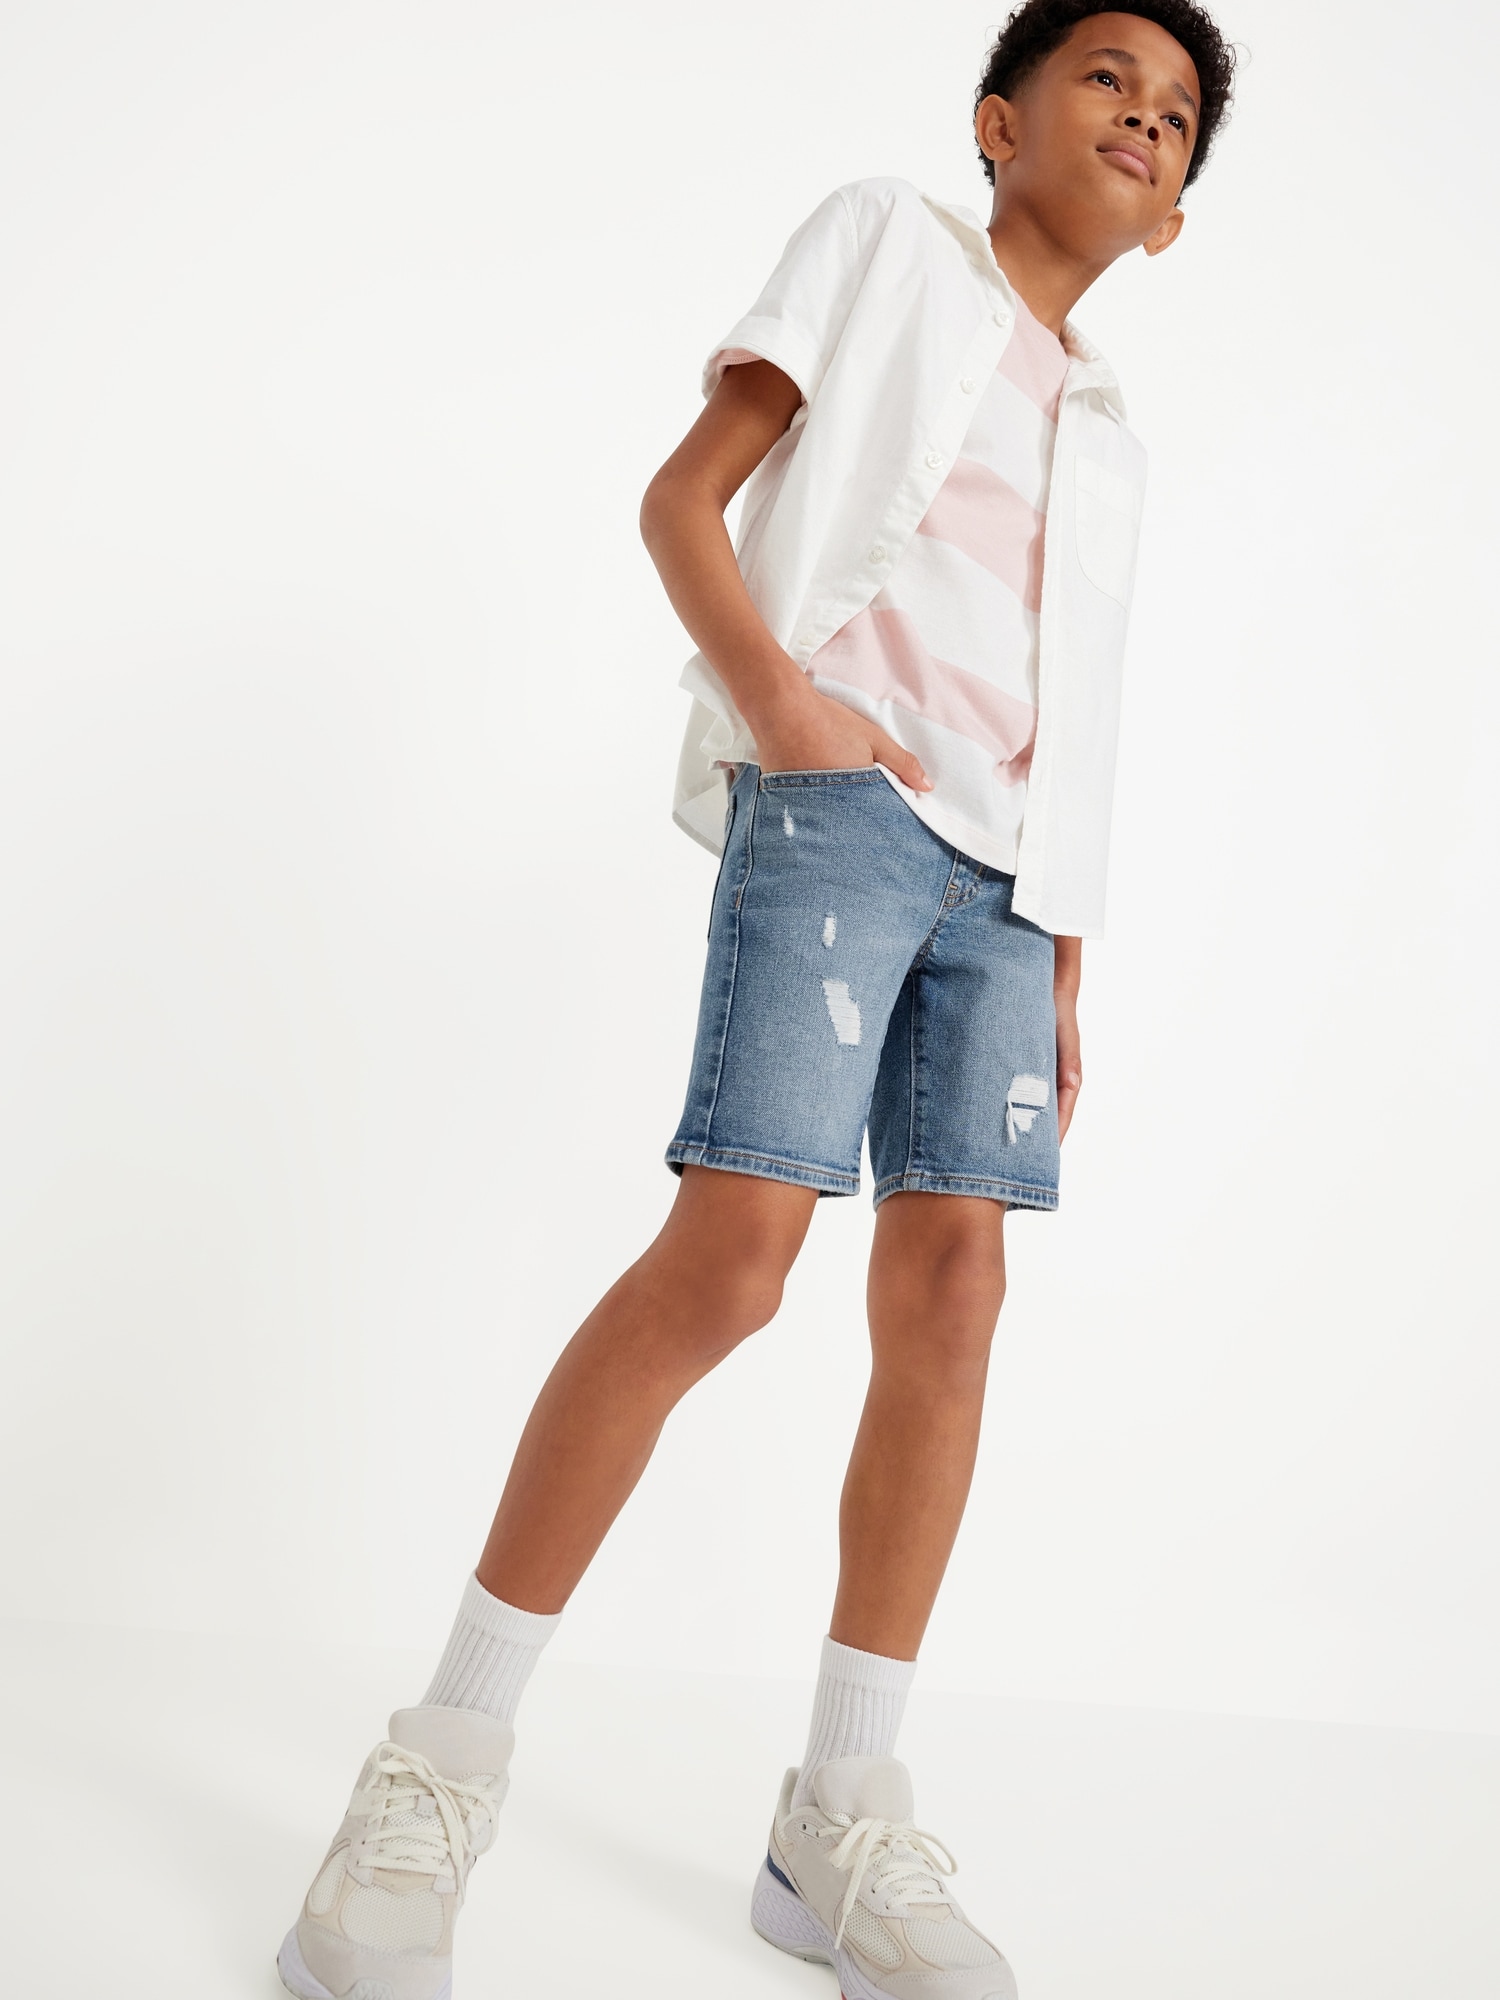 Knee Length 360° Stretch Pull-On Jean Shorts for Boys